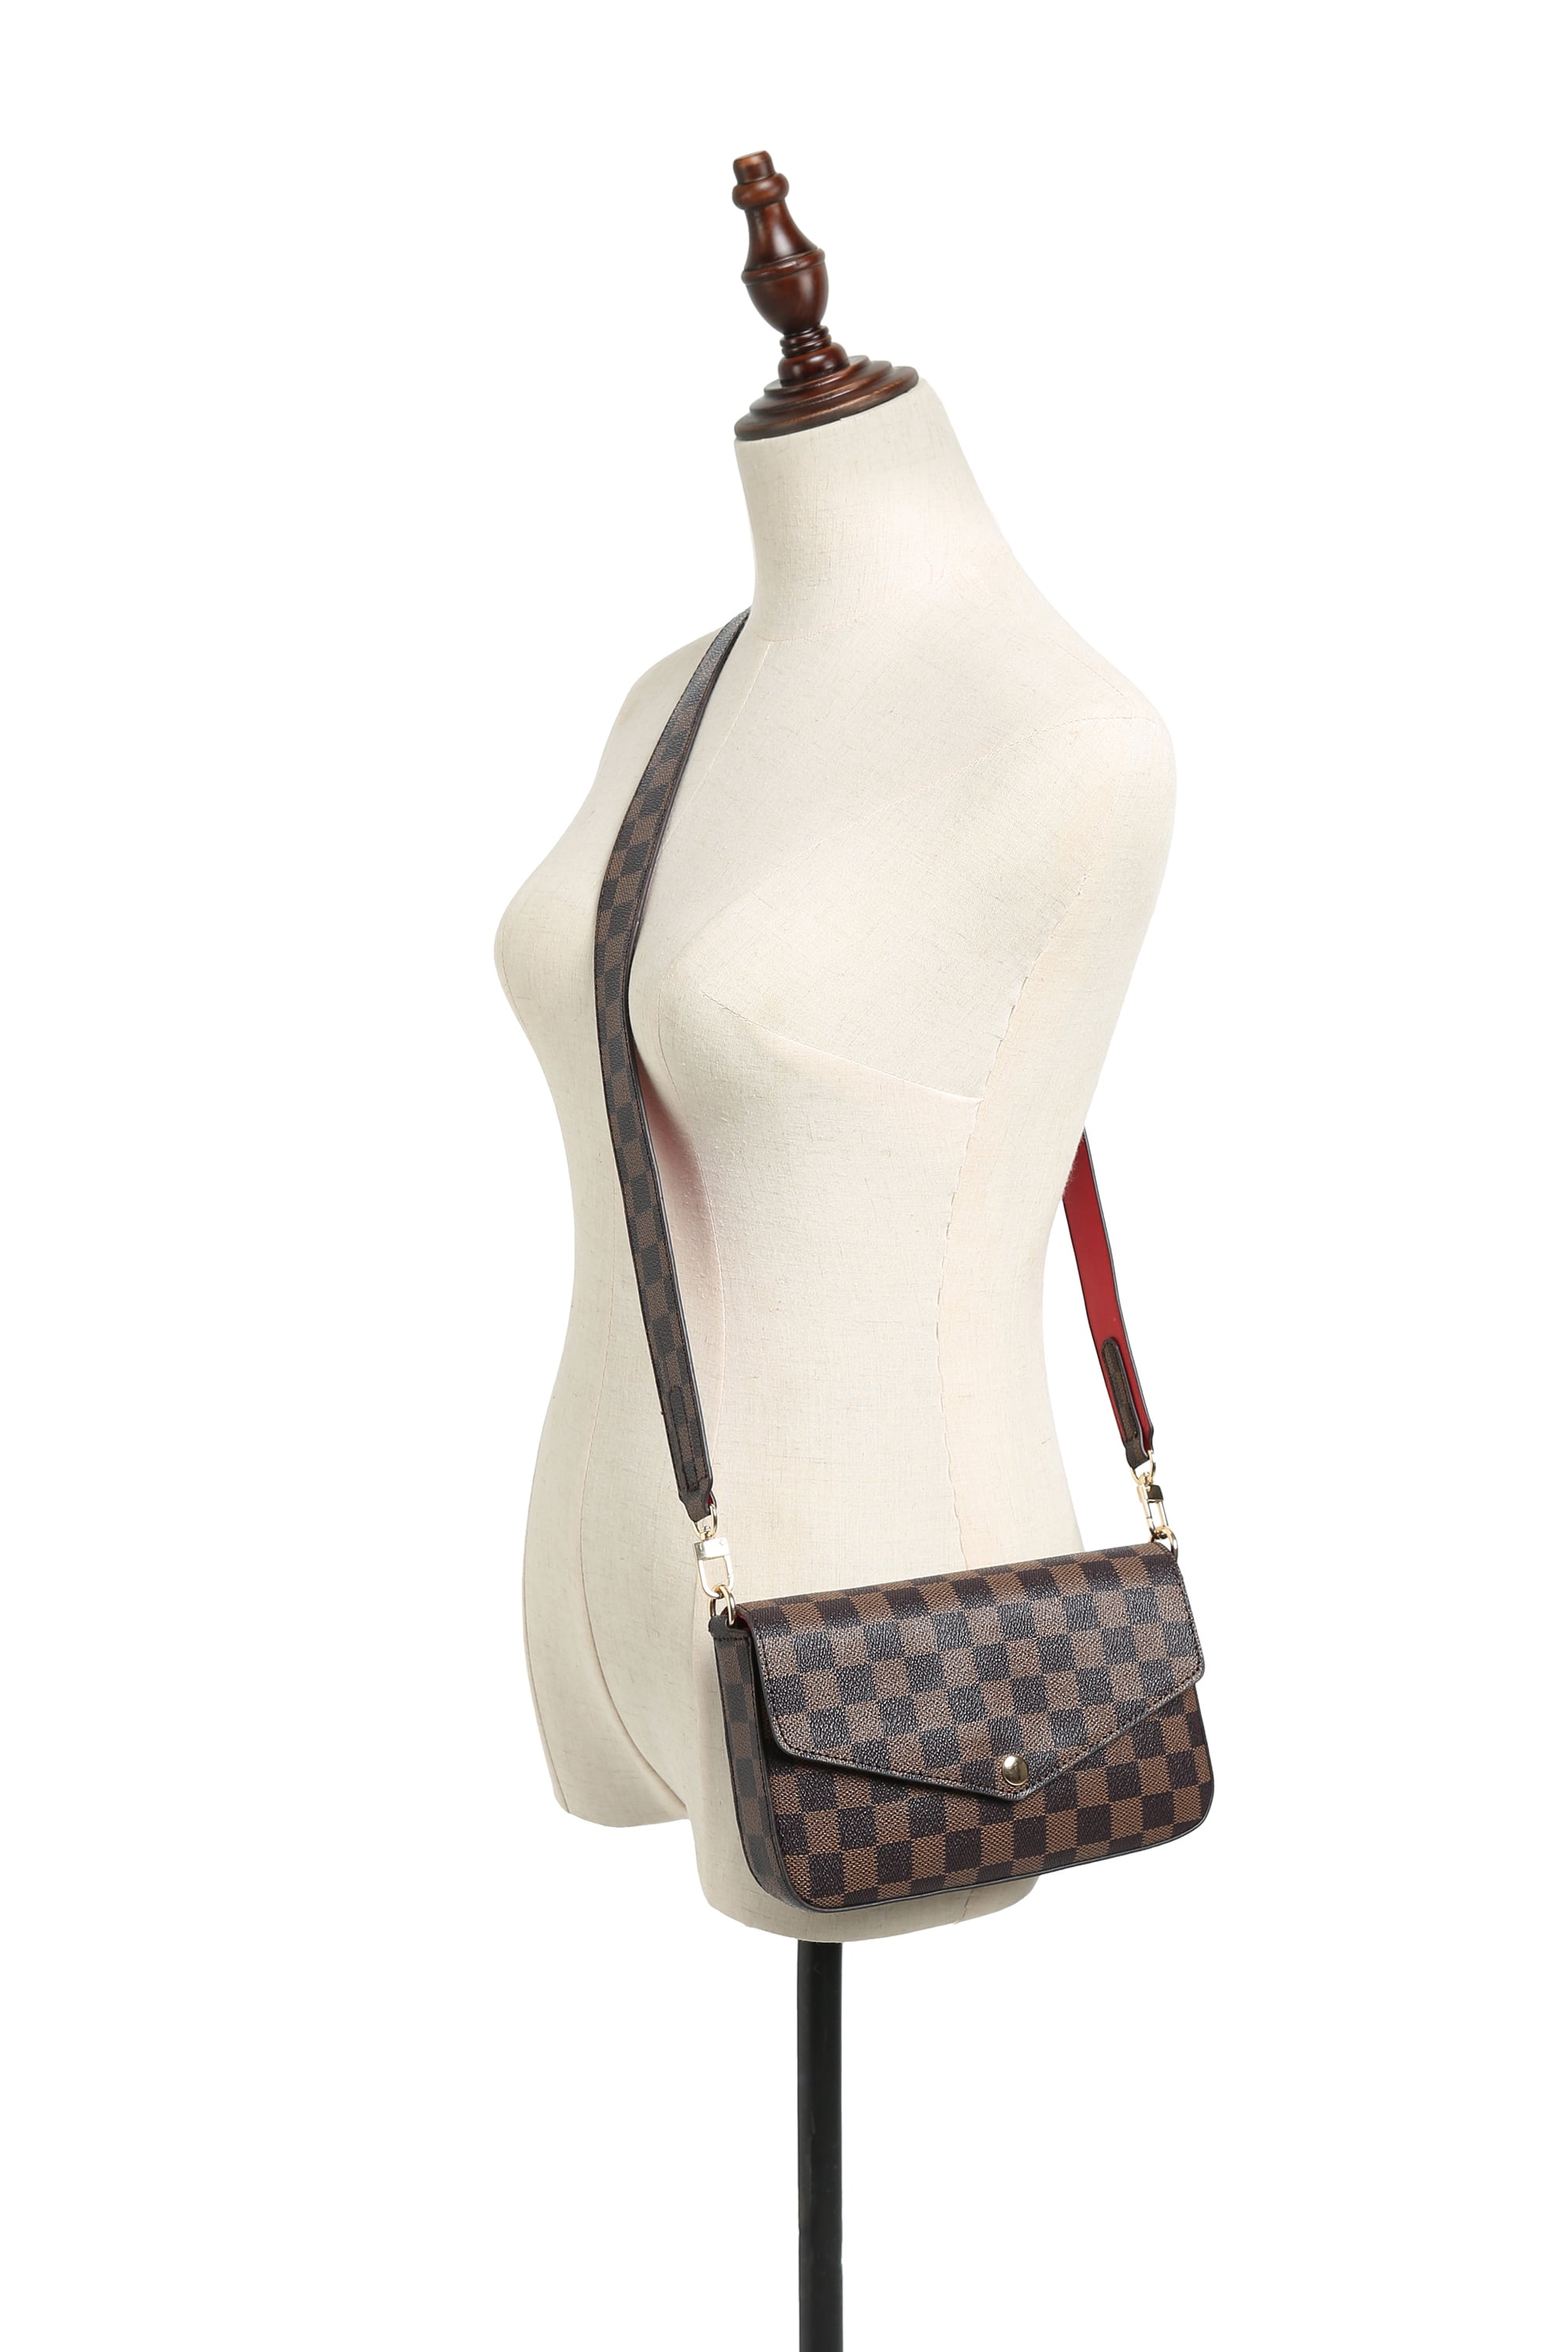 MK Gdledy Fashion Womens Checkered Tote Shoulder Bag With Inner Pouch, PVC  Leather Checkered Cossbody Bag, Big Capacity Handbag, Waterproof And  Wearable Purse Handbag (Cream inside cherry) 